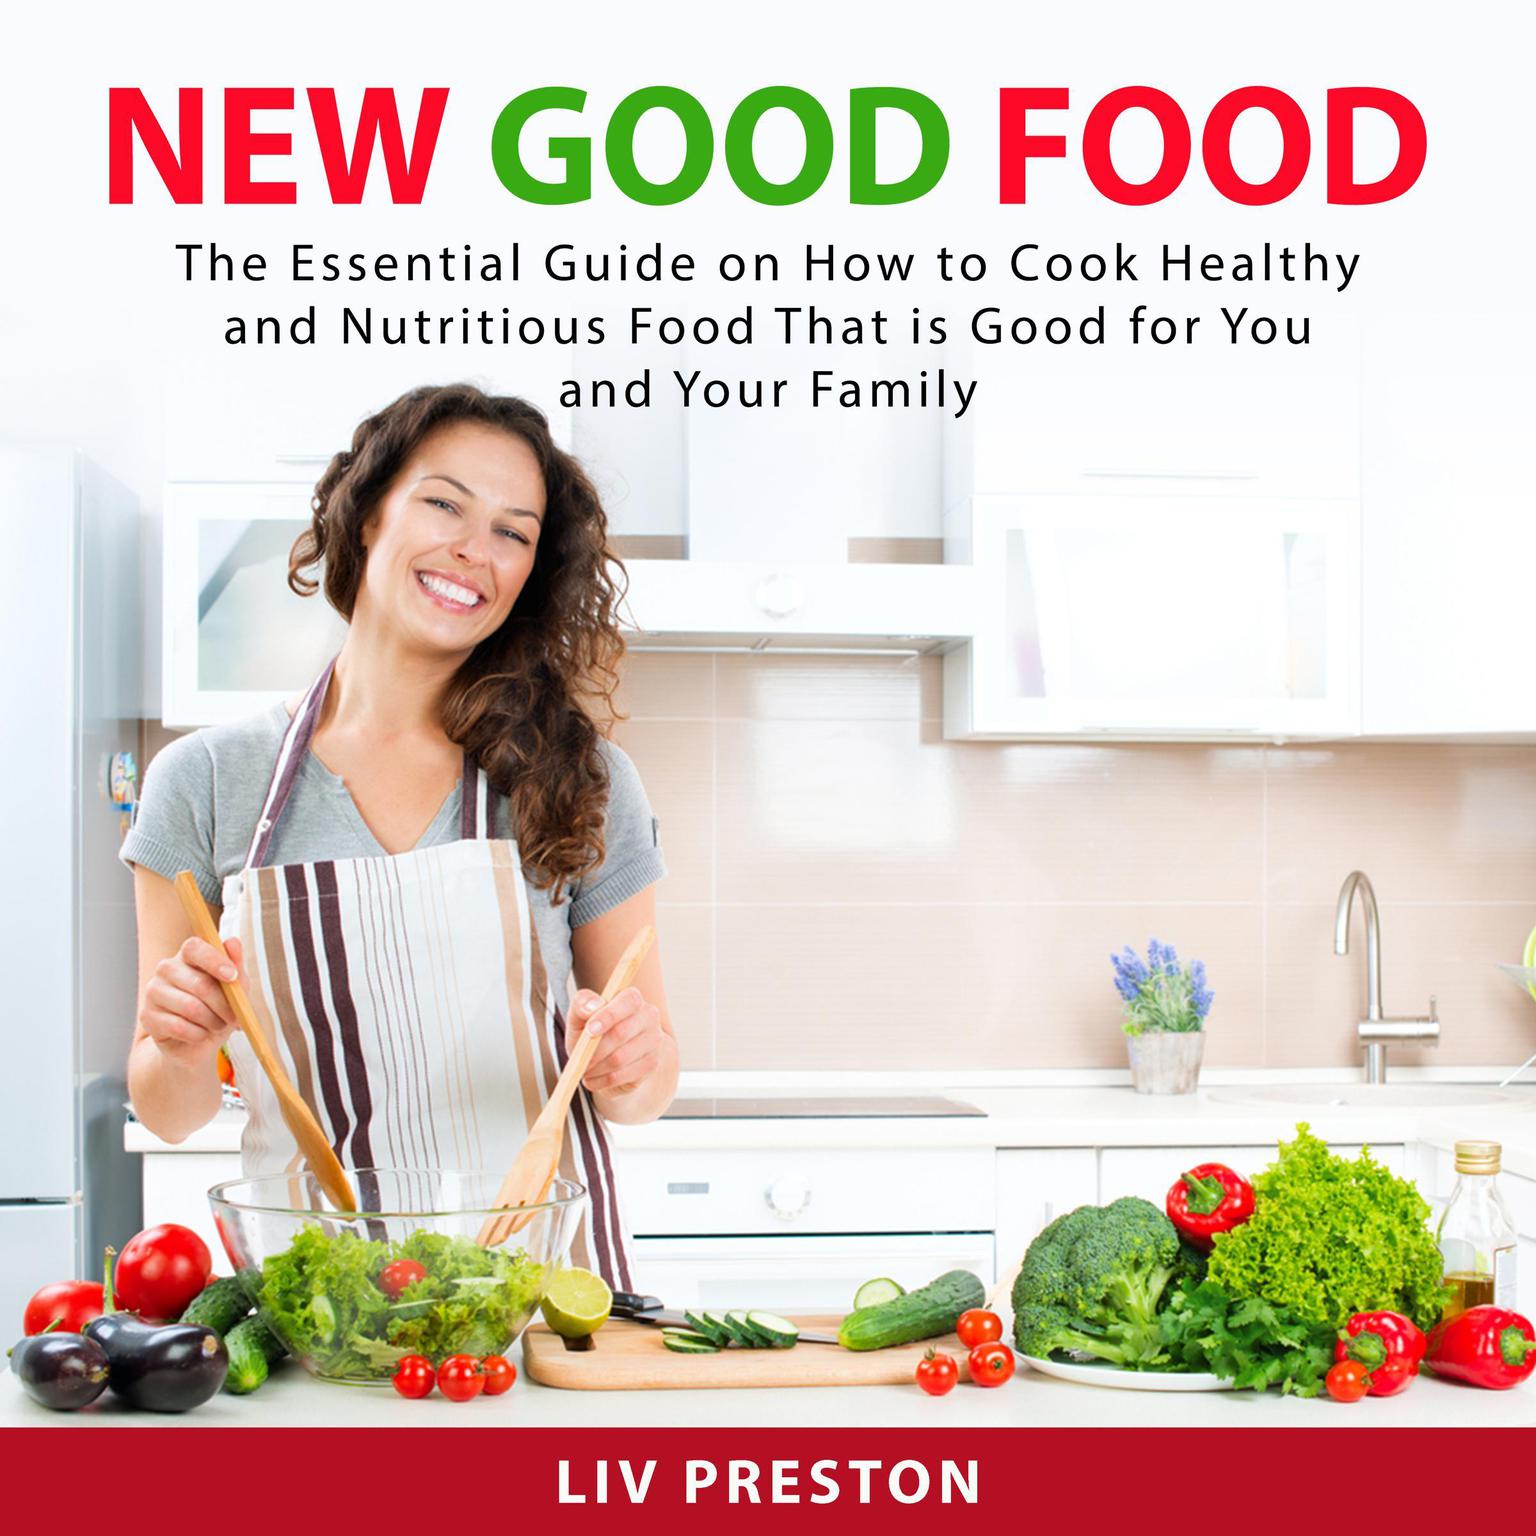 New Good Food: The Essential Guide on How to Cook Healthy and Nutritious Food That is Good For You and Your Family Audiobook, by Liv Preston